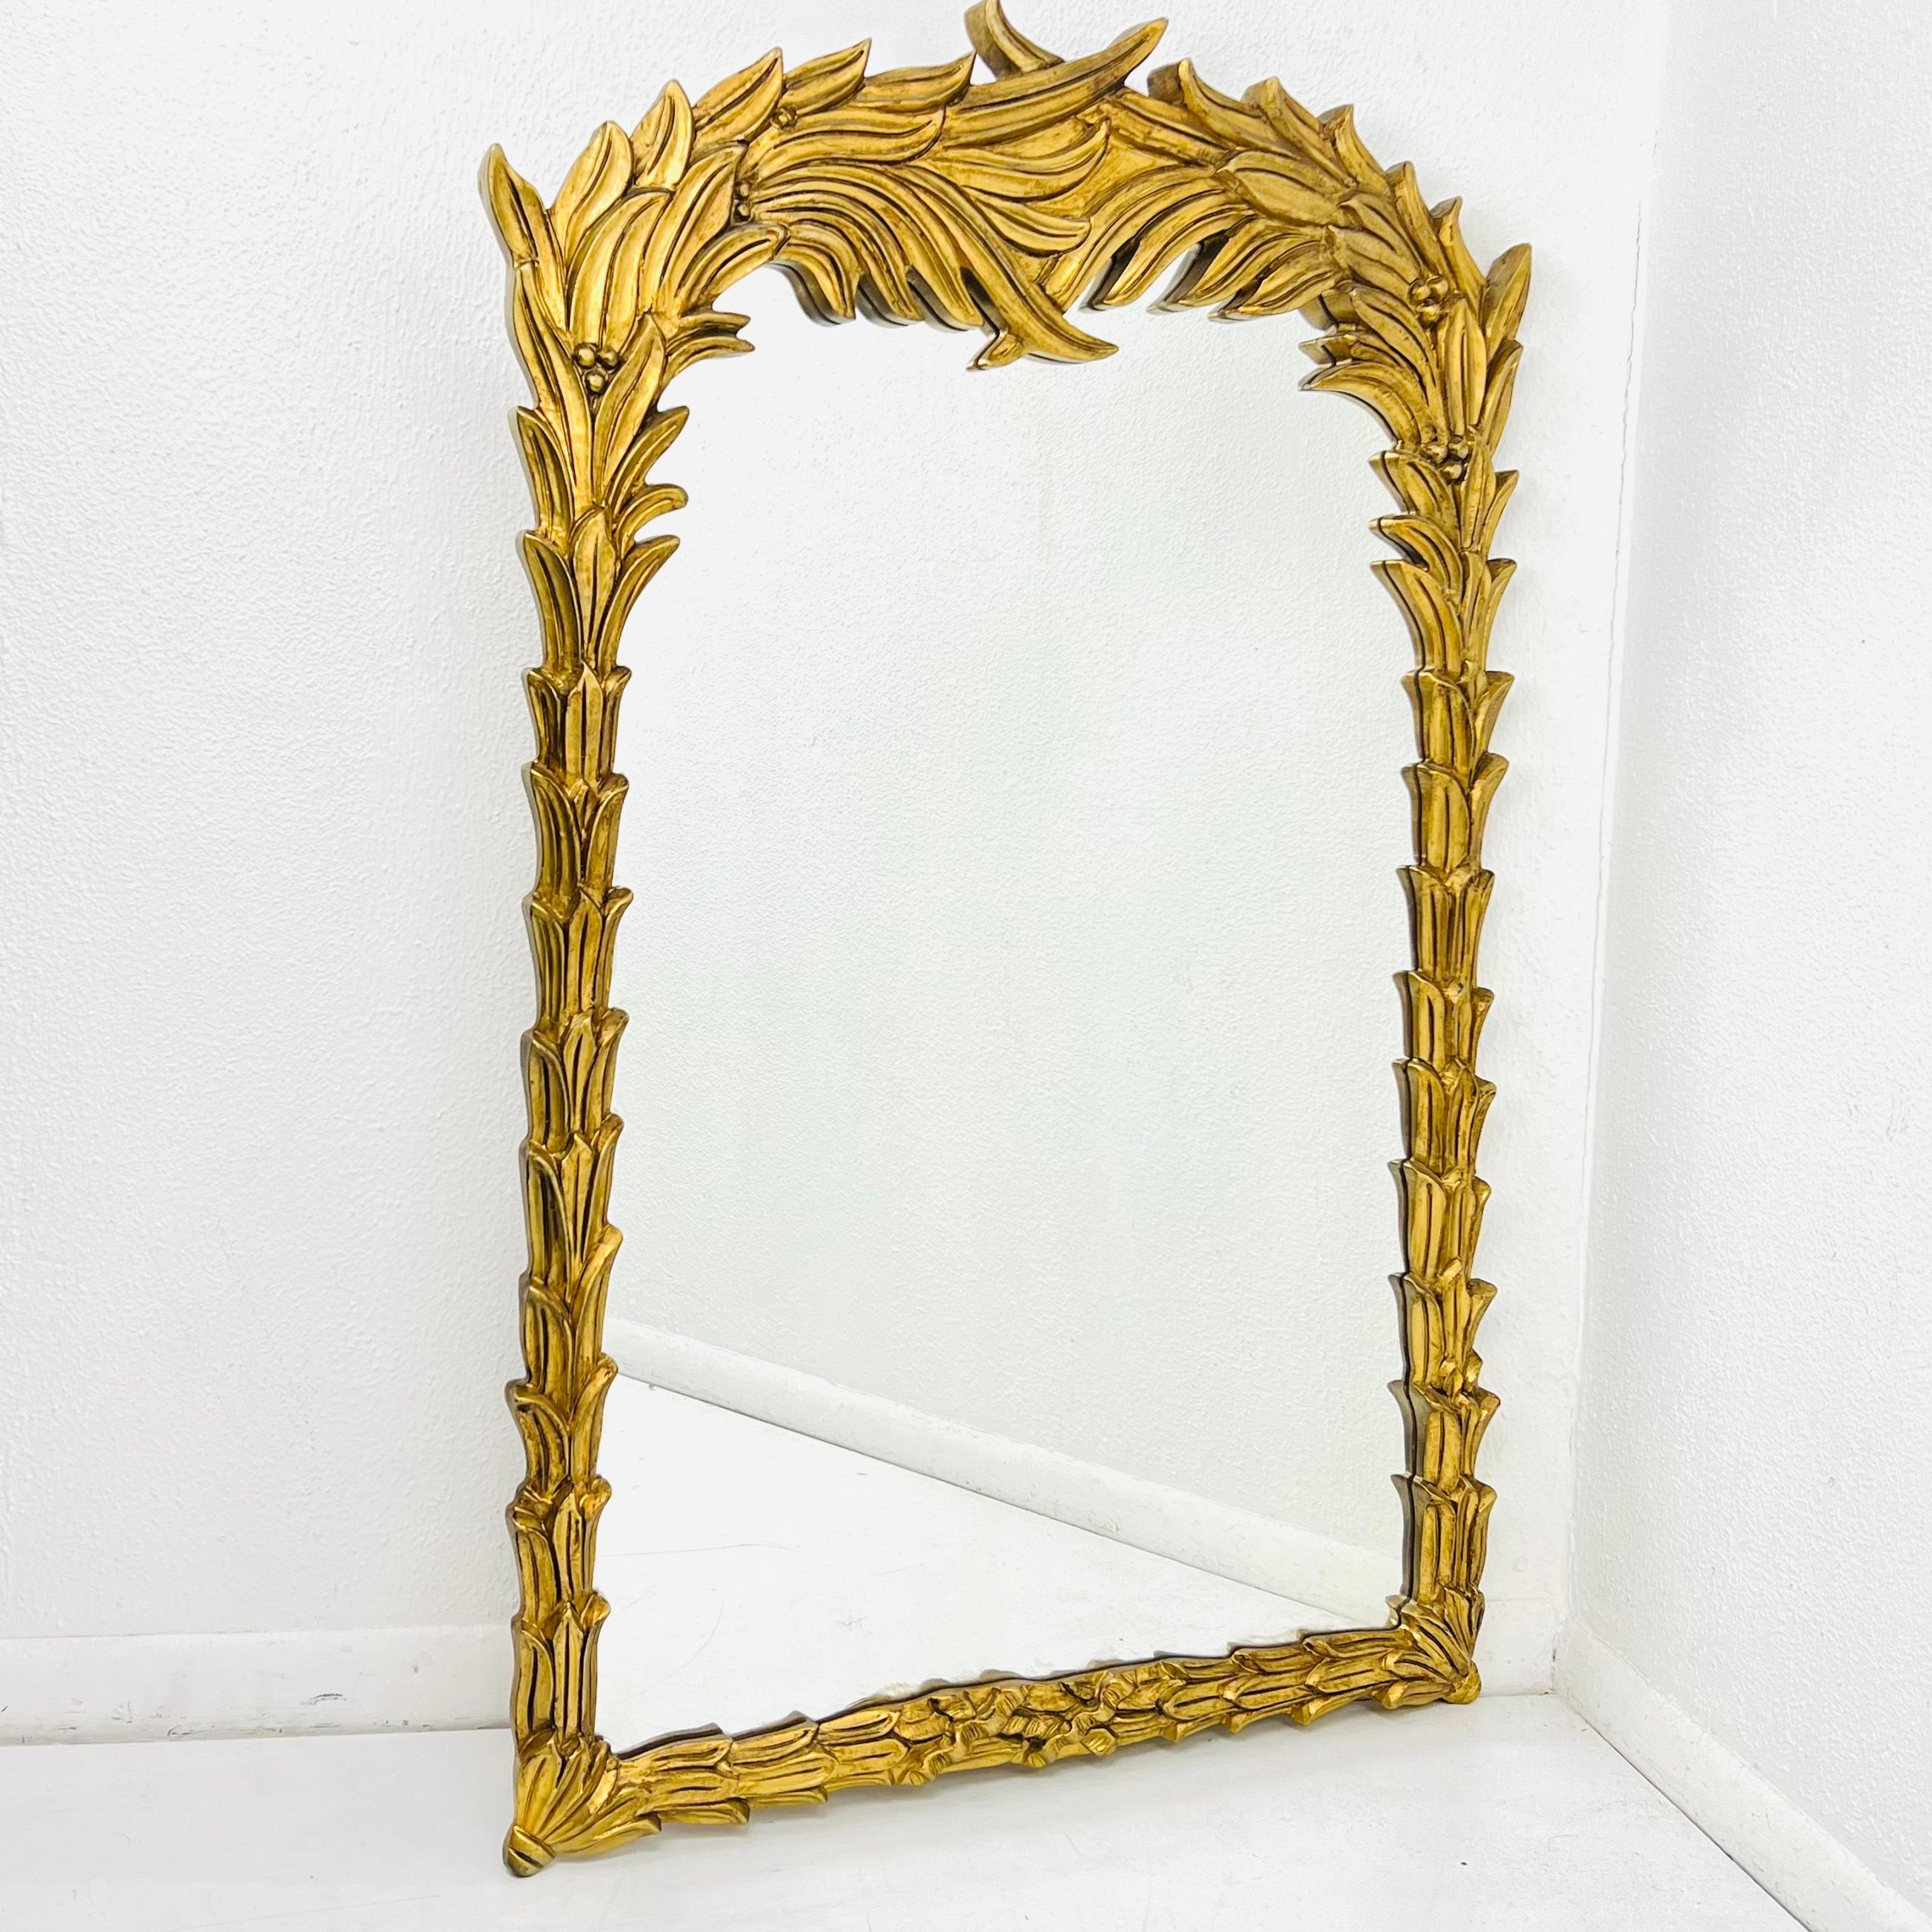 Sculptural palm leaf wall mirror in the manner of modernist designer Serge Roche. Gilded finish accents the gorgeous details in the sculptural palm fronds surrounding the mirror. Very good vintage condition. 32